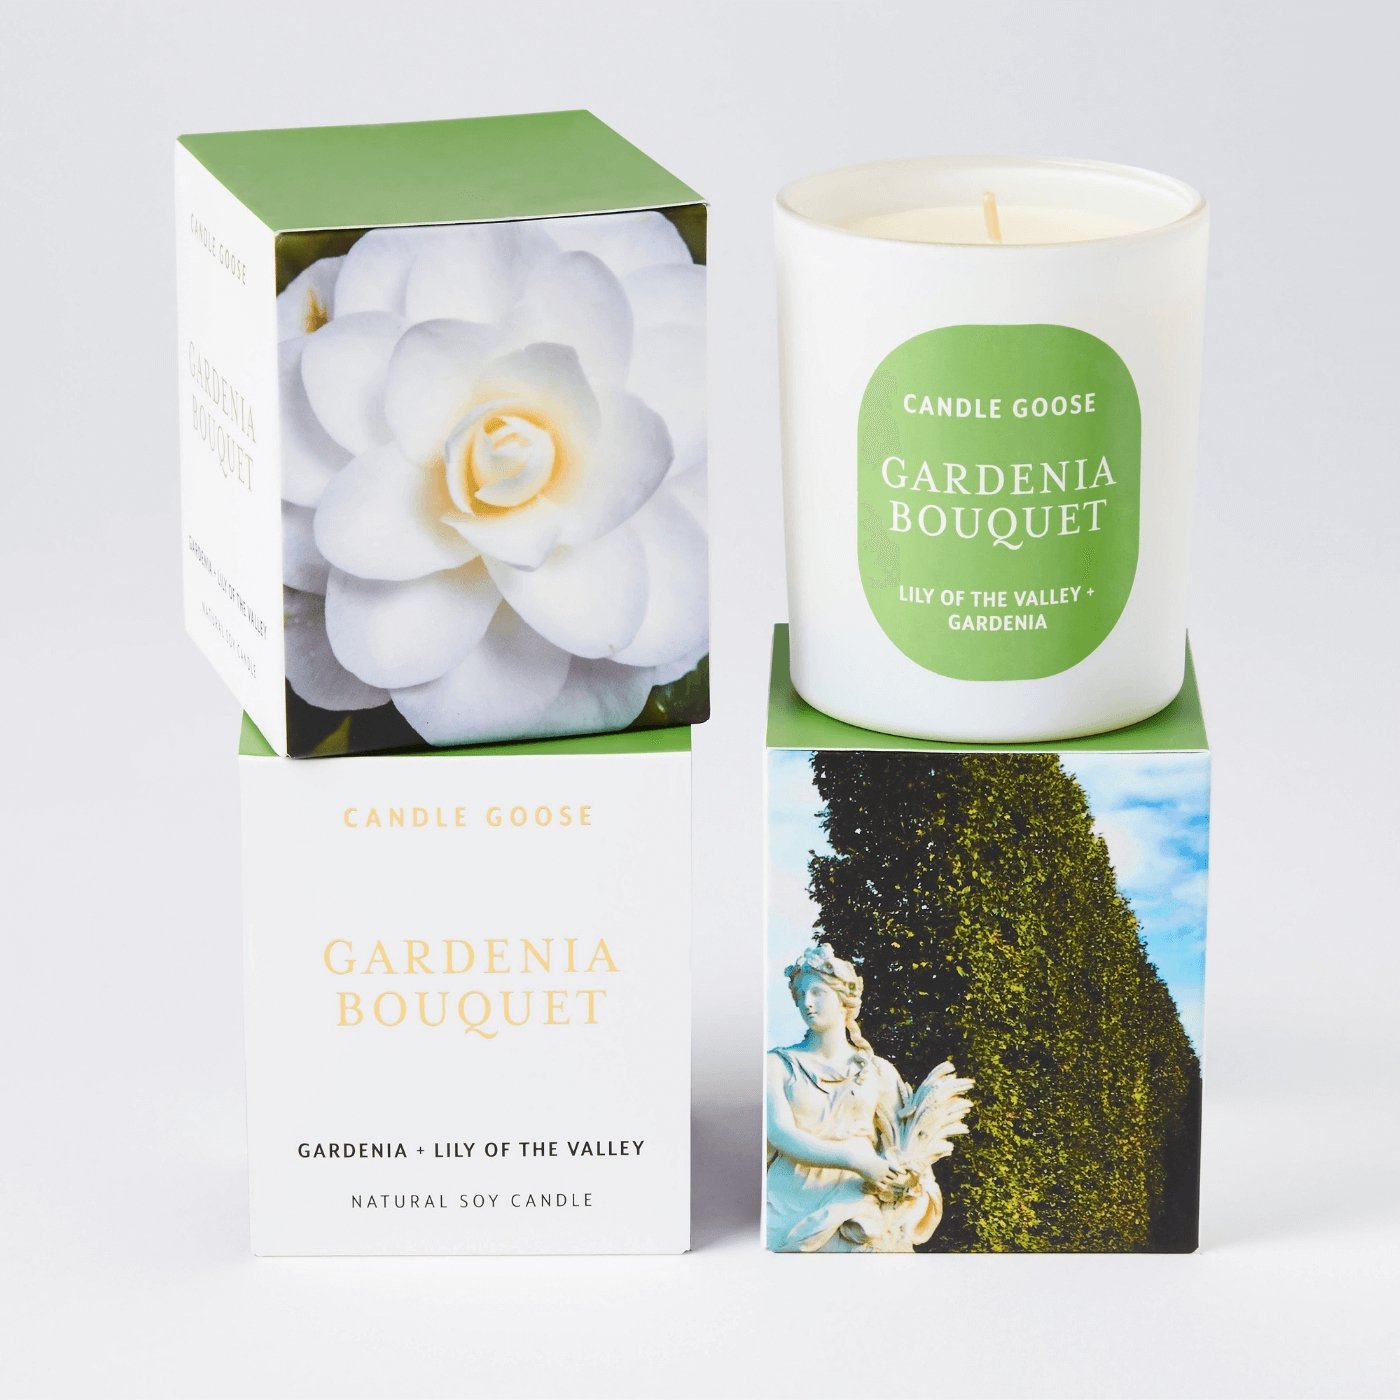 Gardenia Bouquet Hand Poured Soy Wax Candle - 200g -The Mountain Merchant -Candle Goose